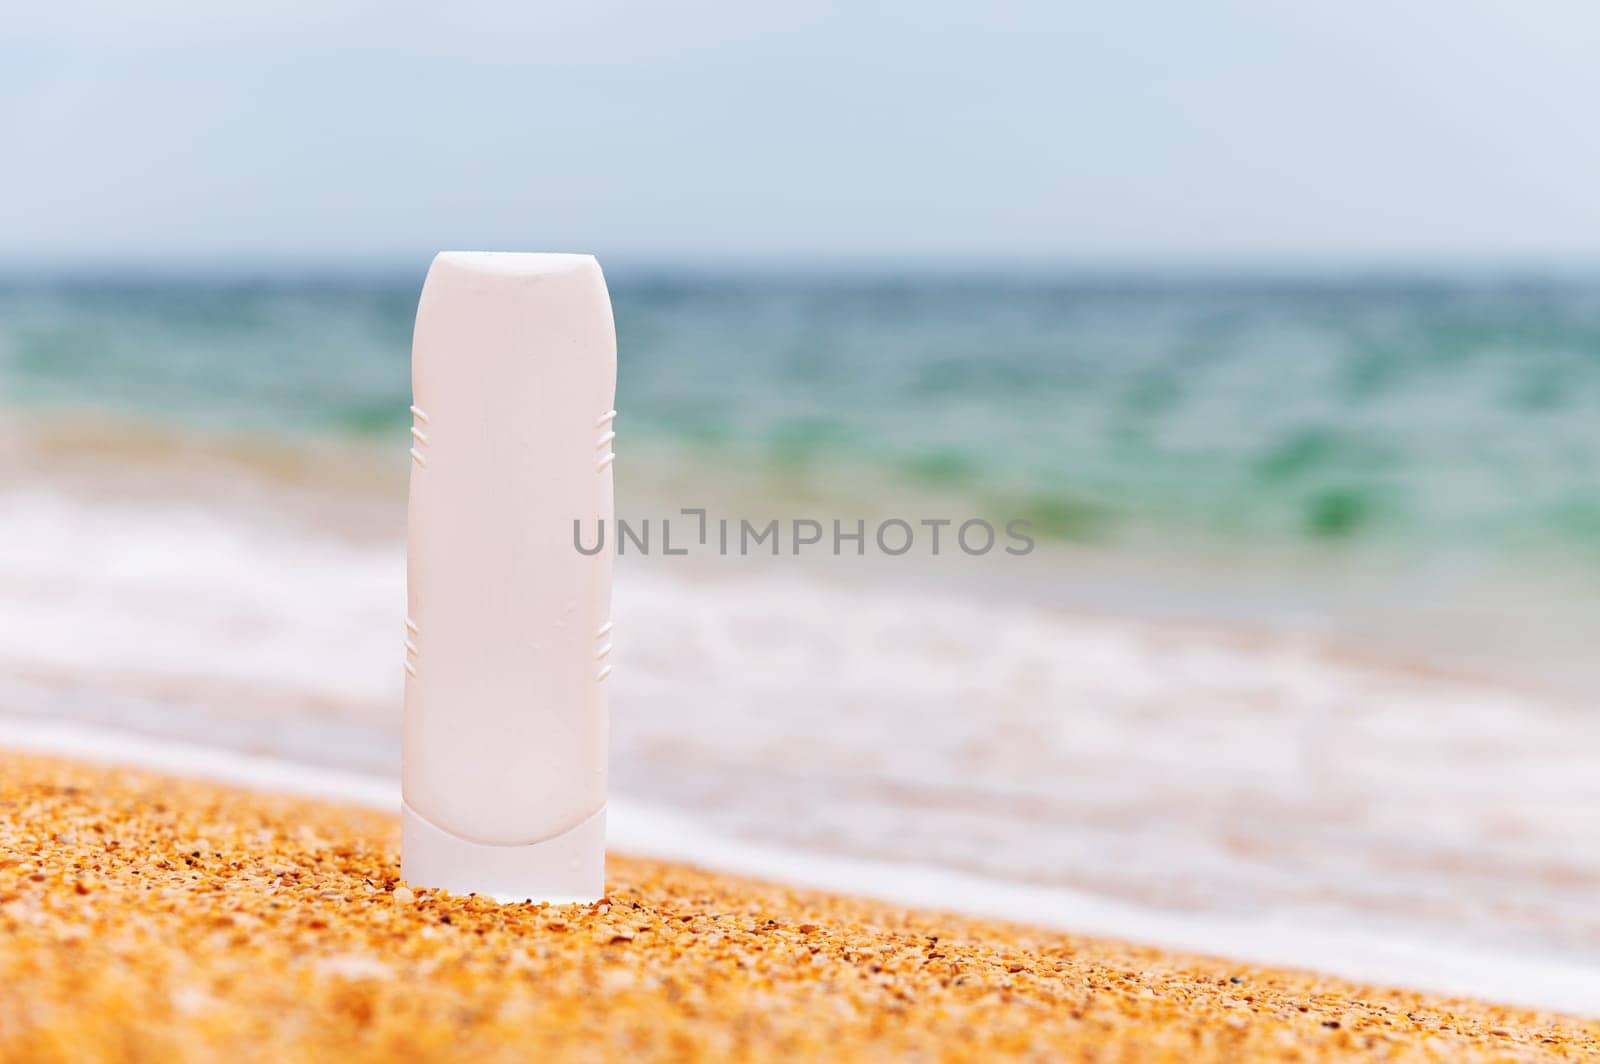 empty cosmetic skin care cream or sunscreen on sandy beach on sea background. White plastic tube with sunscreen. Before going out to sea or sunbathing, apply sunscreen to protect against ultraviolet rays. to prevent skin cancer.